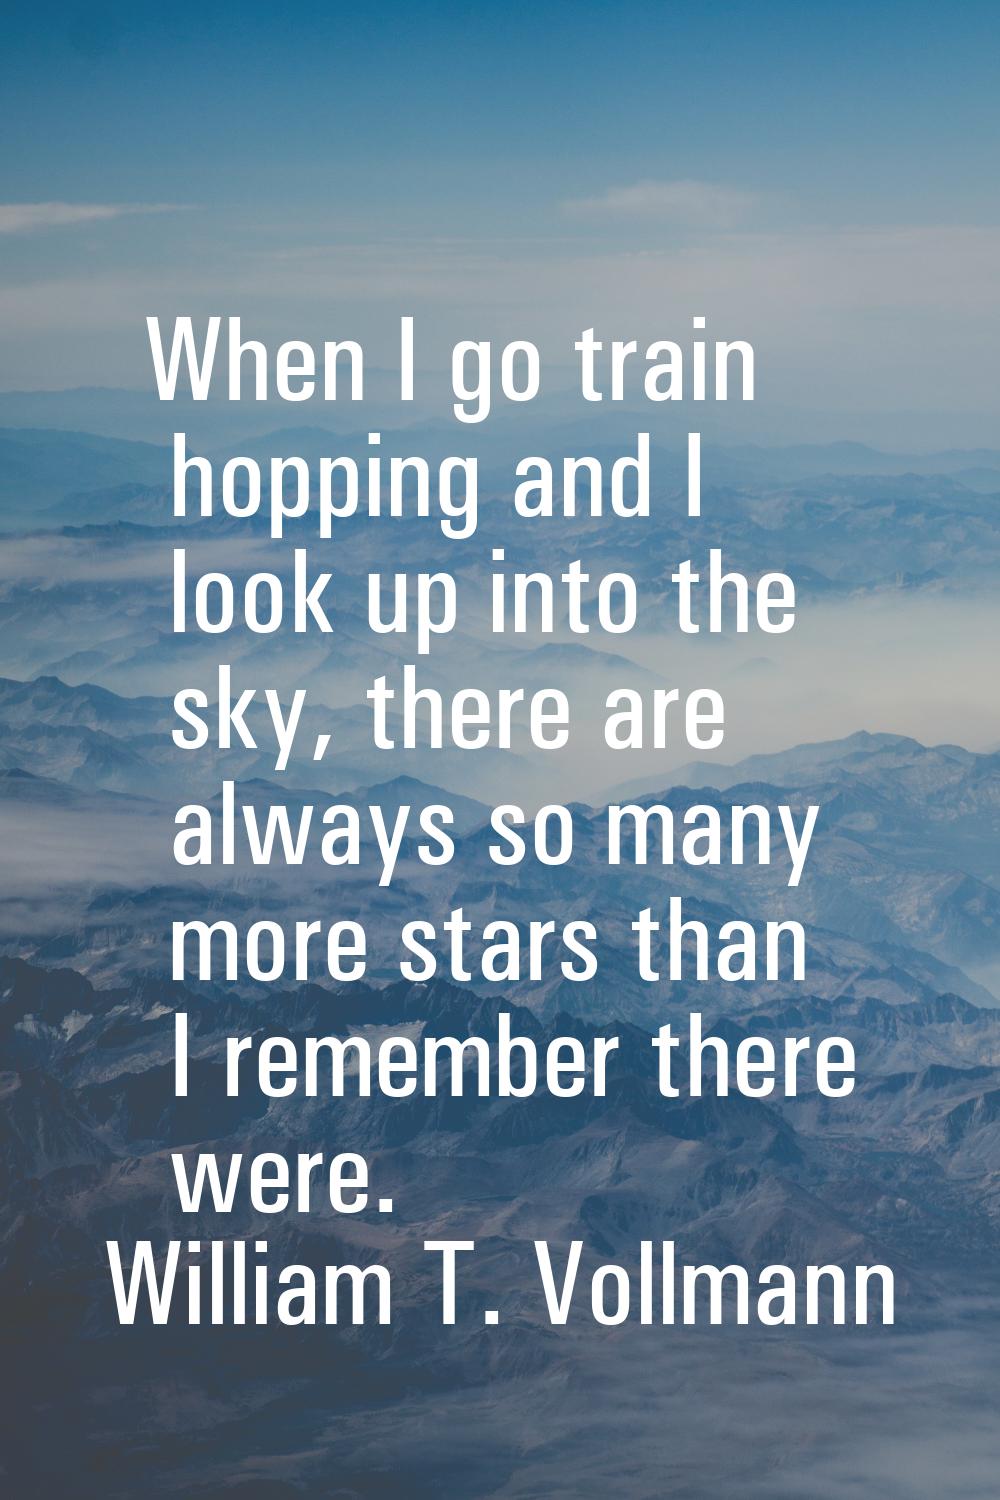 When I go train hopping and I look up into the sky, there are always so many more stars than I reme